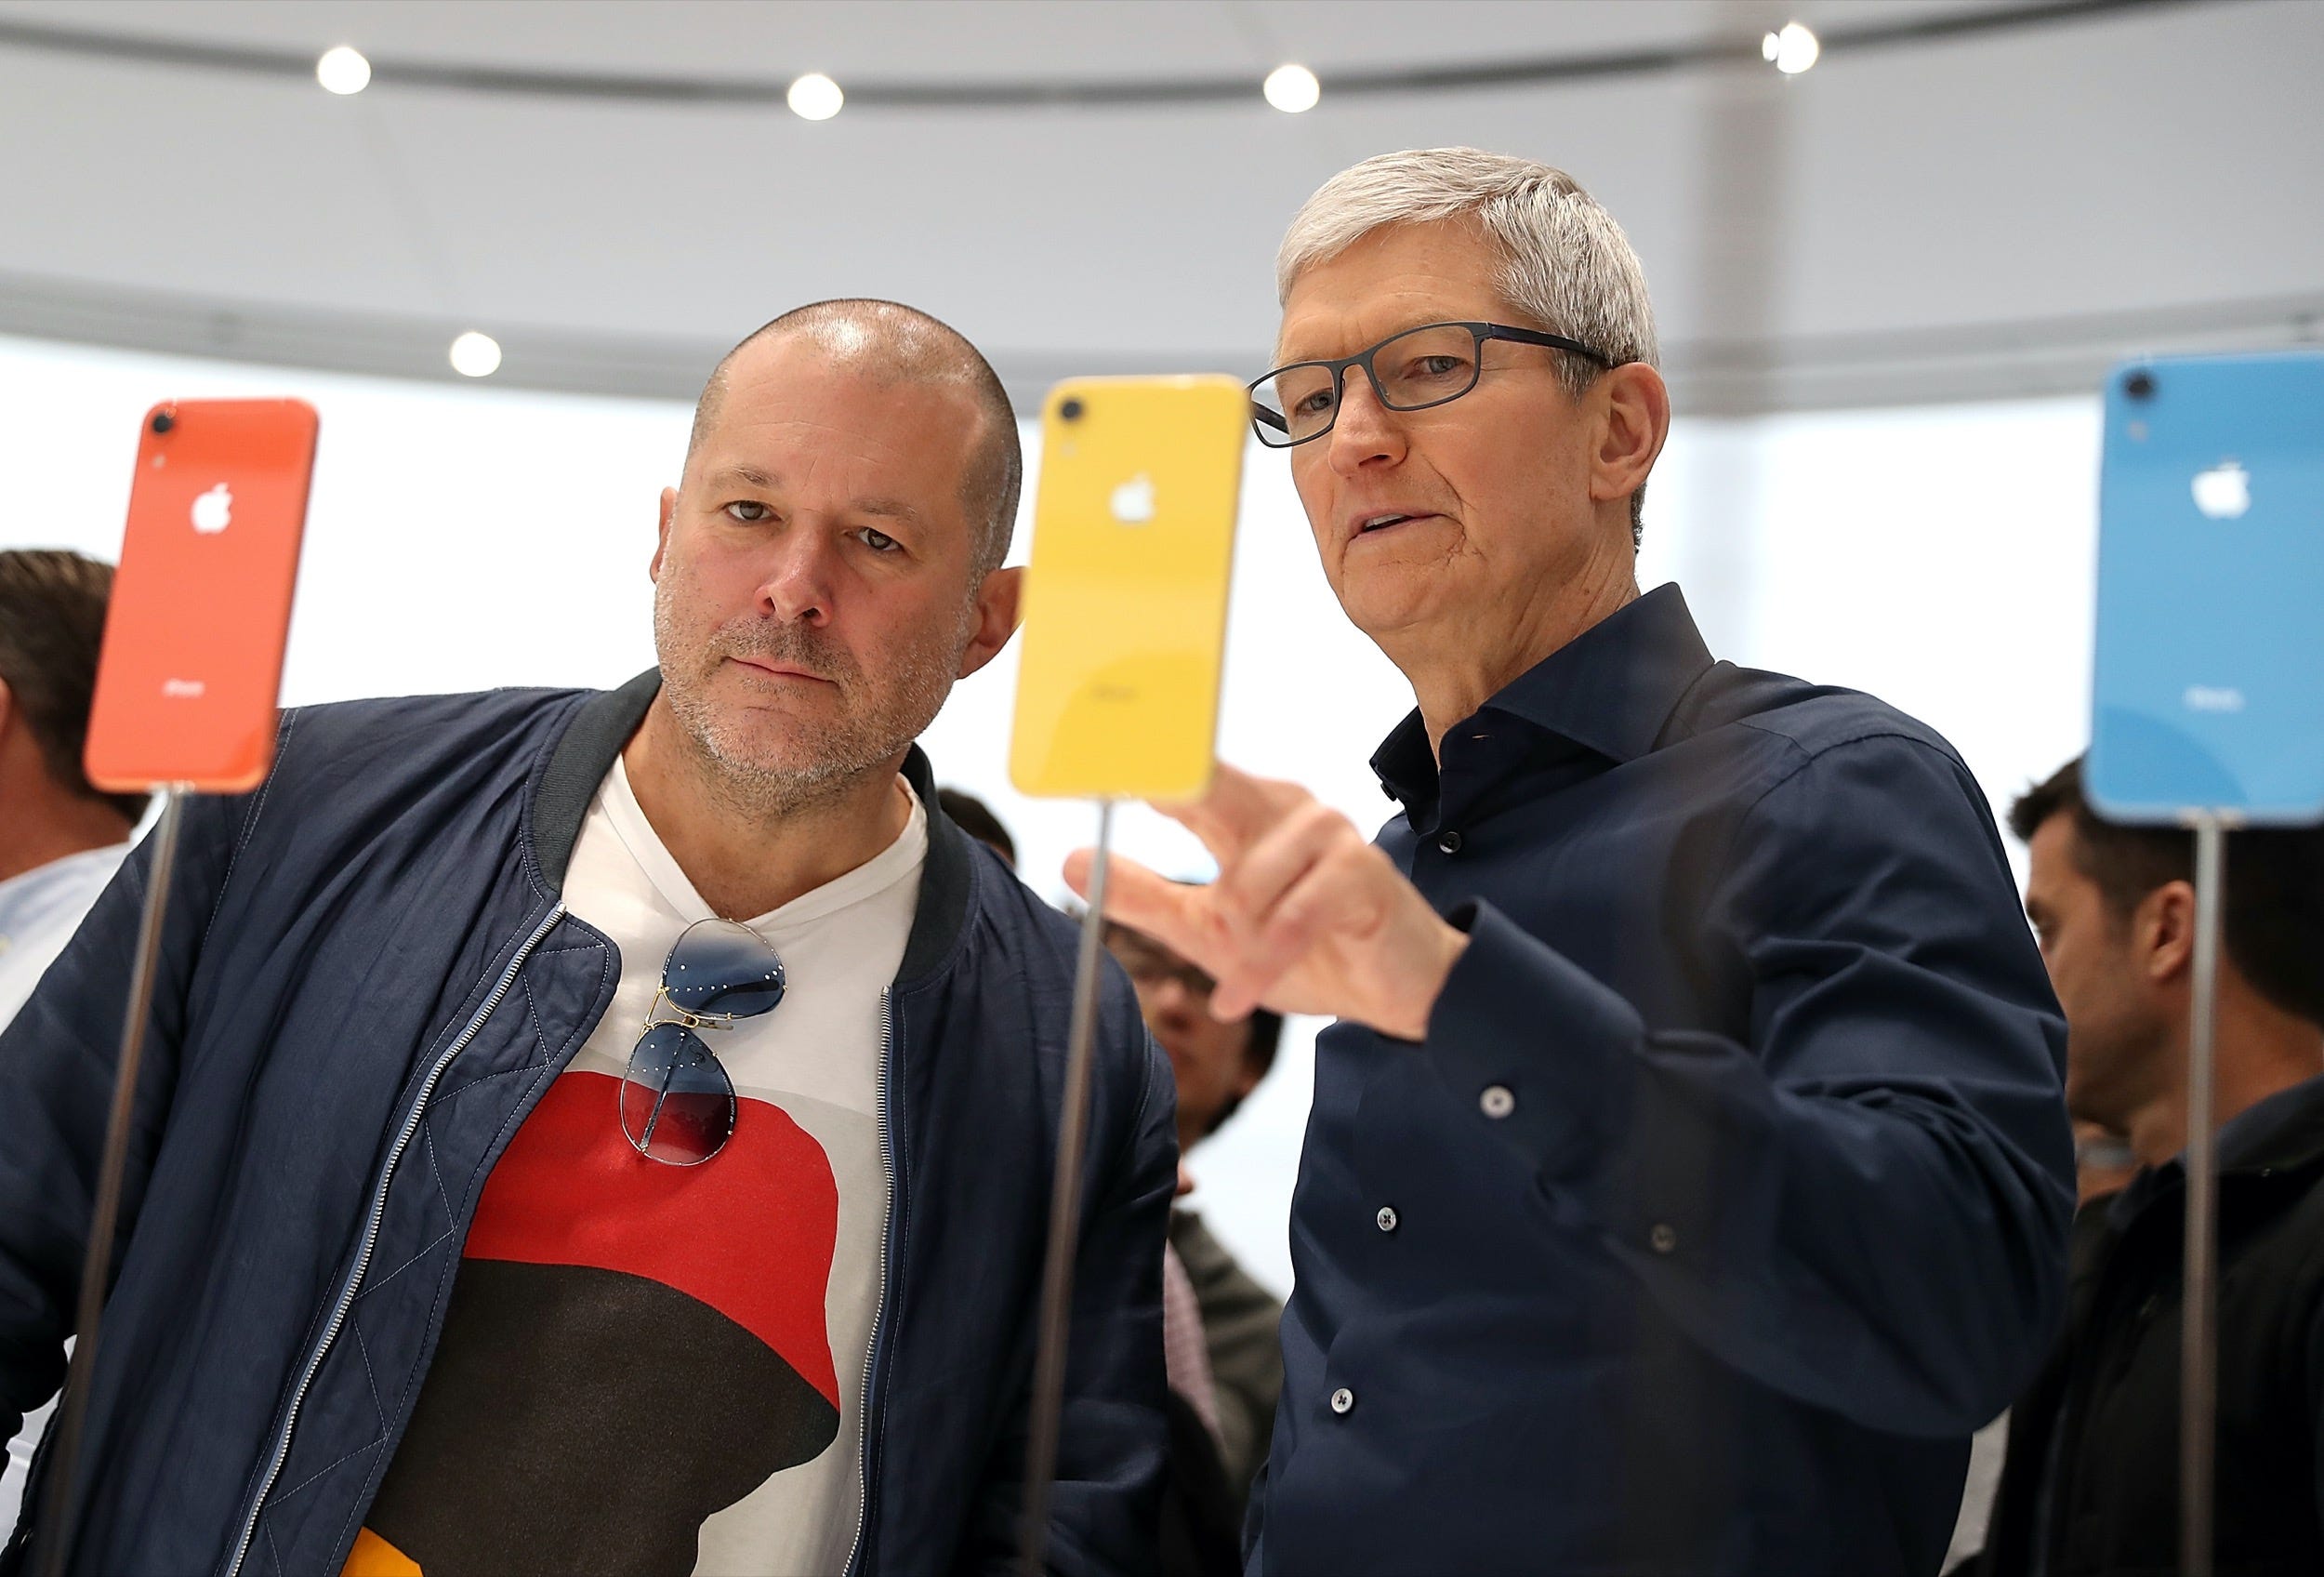 jony ive apple CUPERTINO, CA - SEPTEMBER 12: Apple chief design officer Jony Ive (L) and Apple CEO Tim Cook inspect the new iPhone XR during an Apple special event at the Steve Jobs Theatre on September 12, 2018 in Cupertino, California. Apple released three new versions of the iPhone and an update Apple Watch. (Photo by Justin Sullivan/Getty Images)